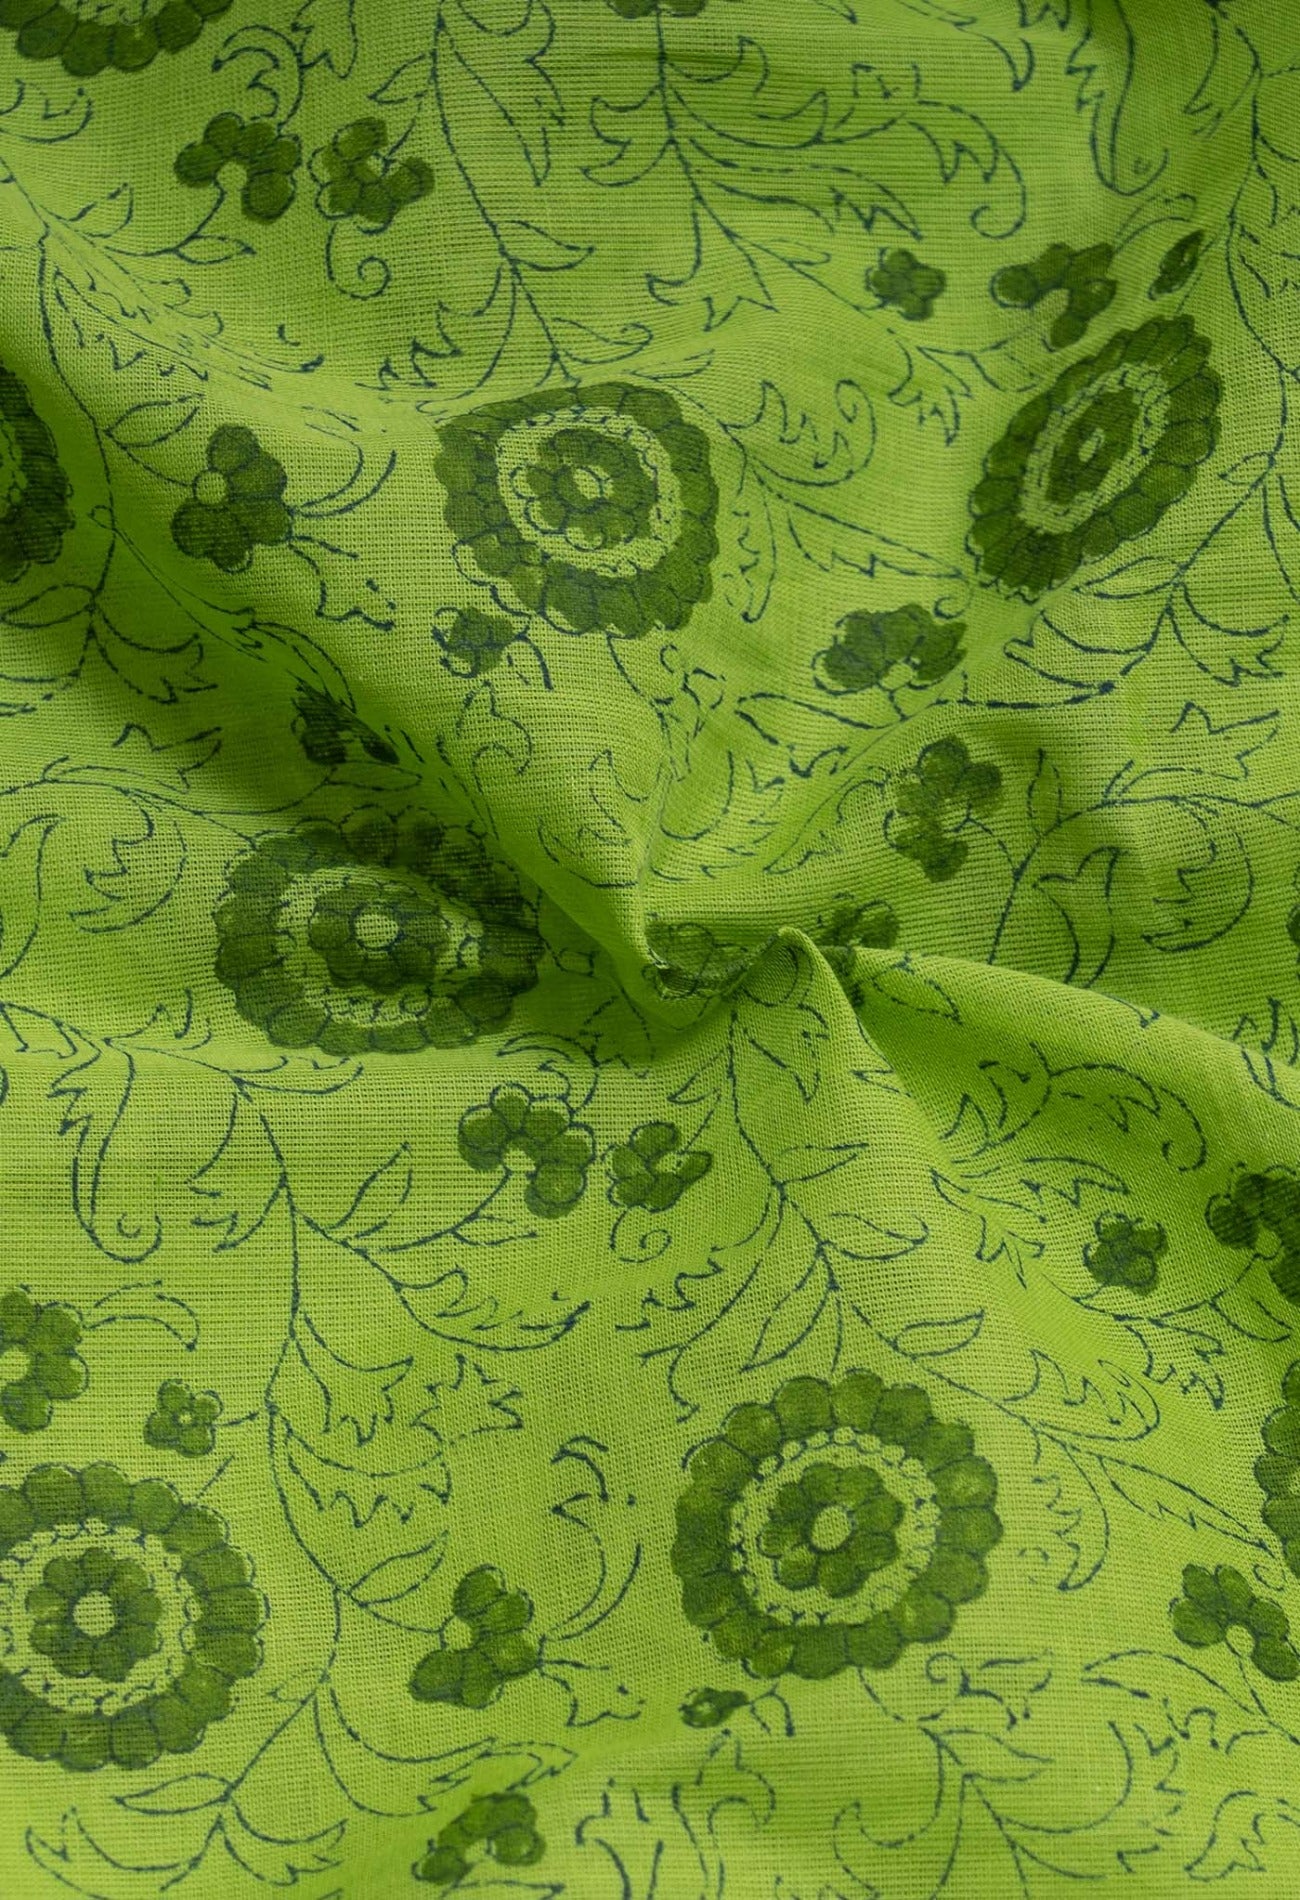 Online Shopping for Green  Block Printed Kanchi Cotton Saree with Hand Block Prints from Tamil Nadu at Unnatisilks.com India
